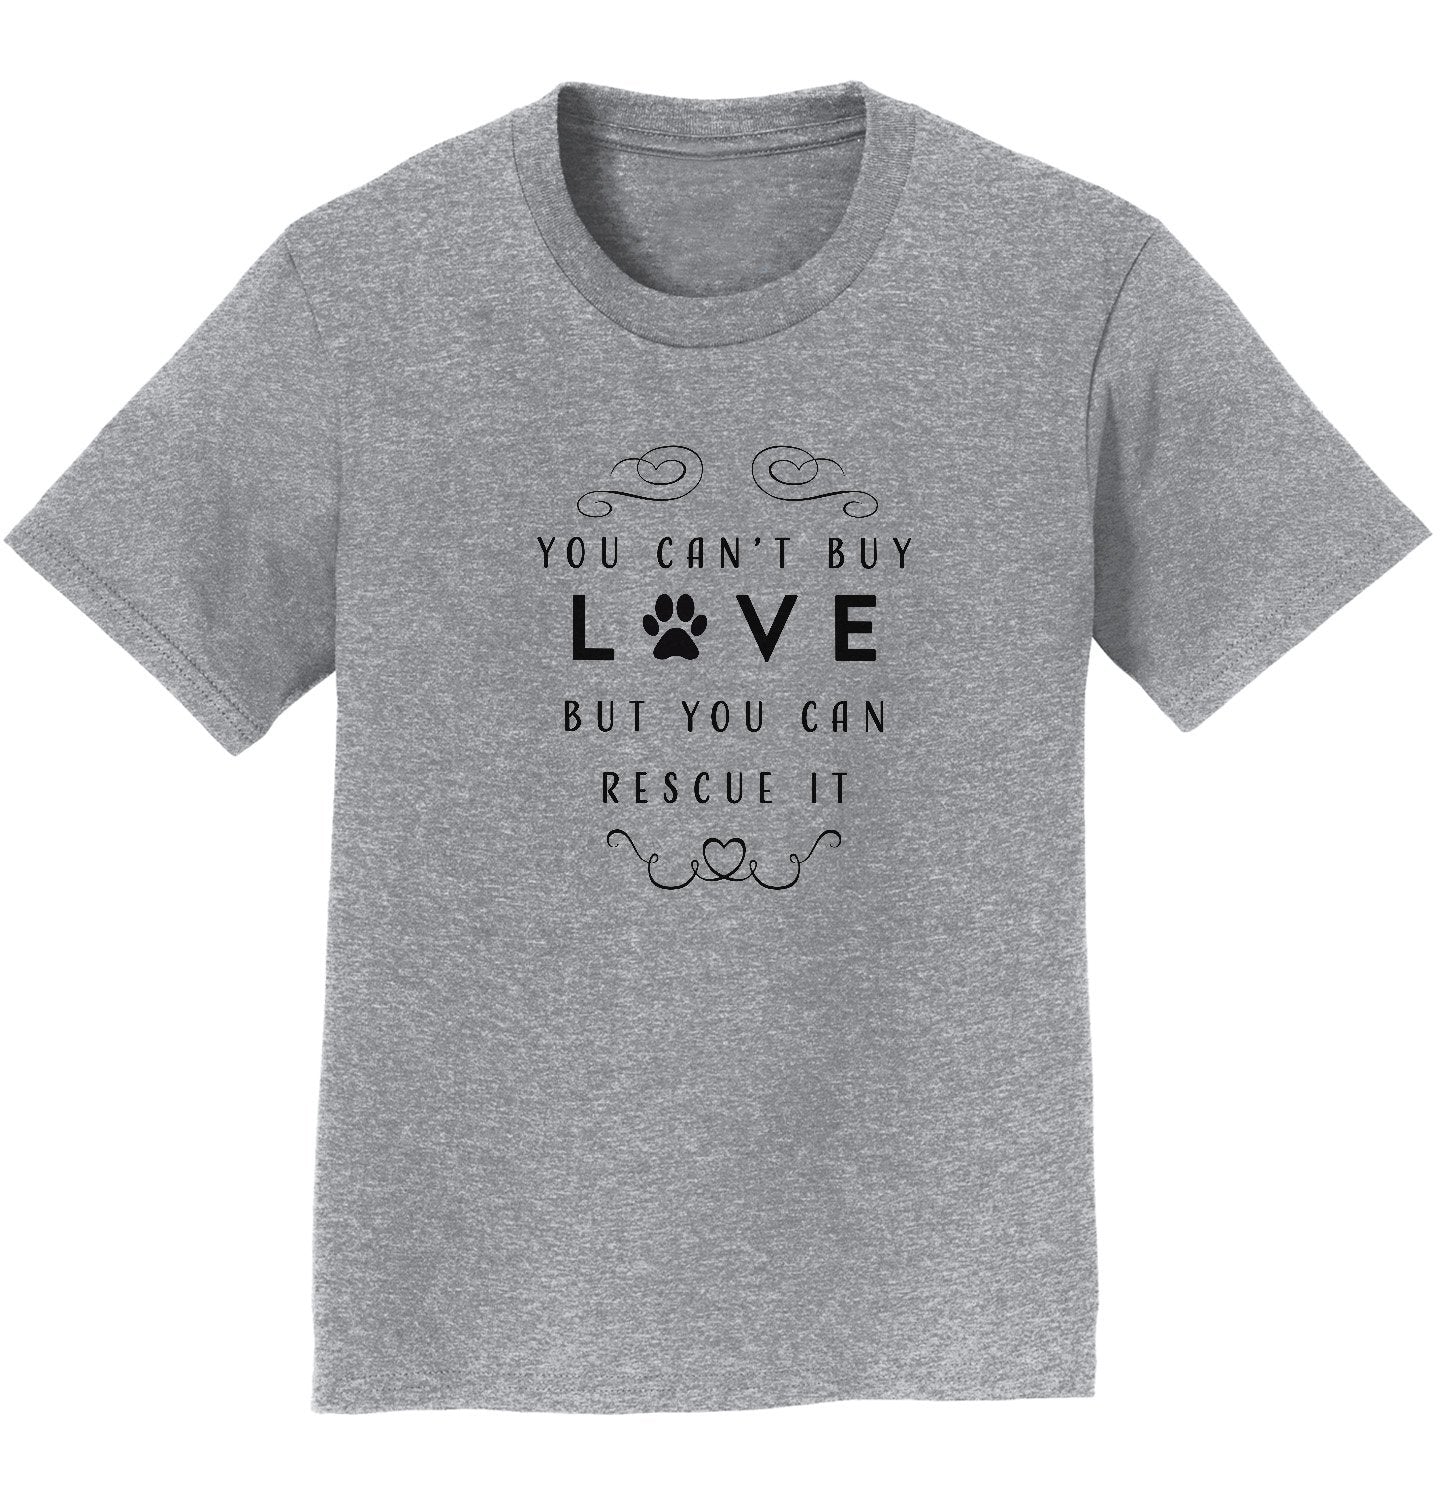 Can Rescue Love - Kids' Unisex T-Shirt